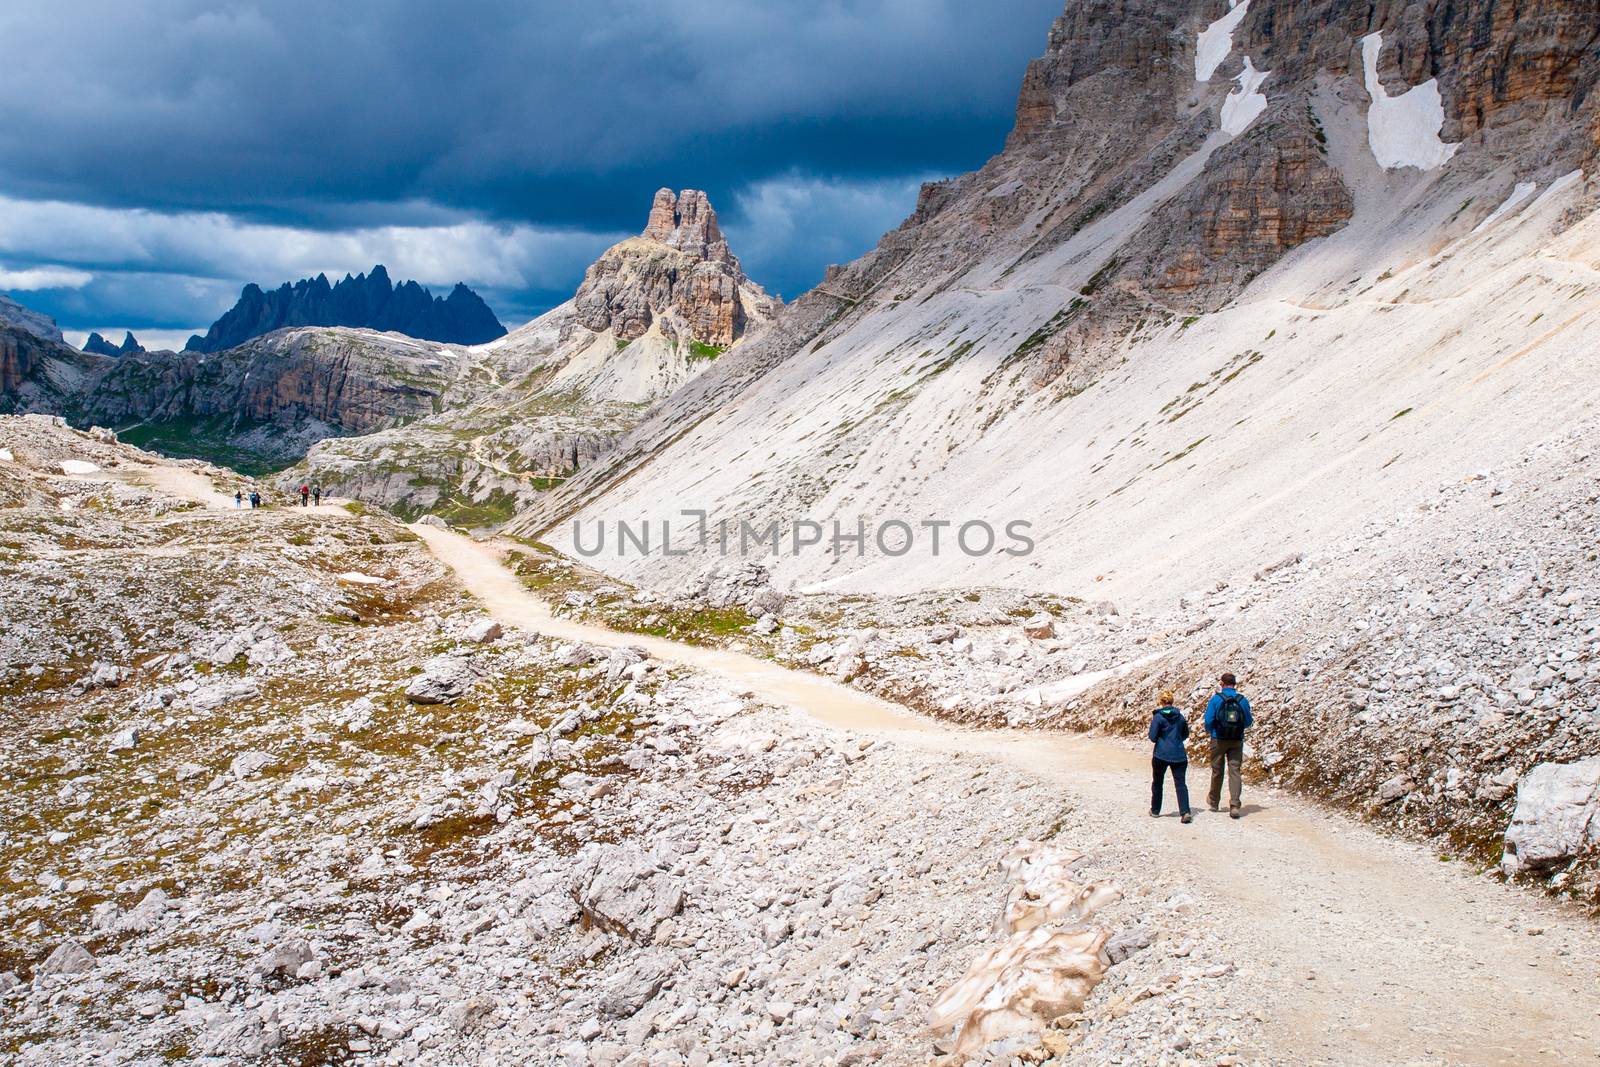 Mountain hikers with trekking poles walks on the rocky path in the mountains. Nordic walking theme by pyty